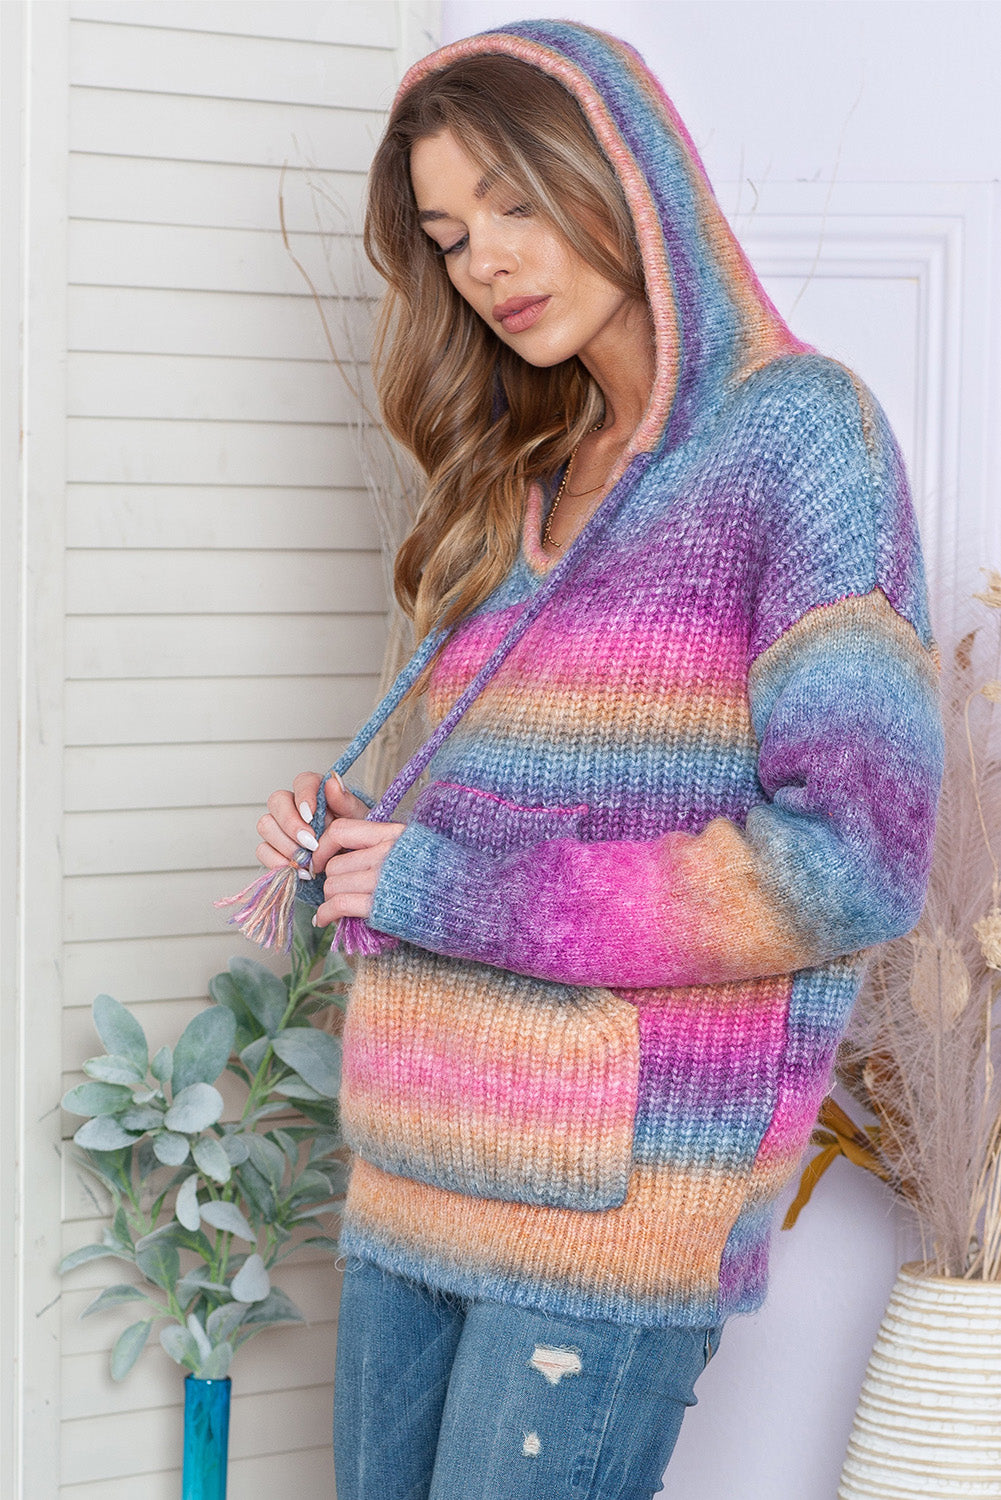 Multicolor Knitted Hooded Sweater with Kangaroo Pocket